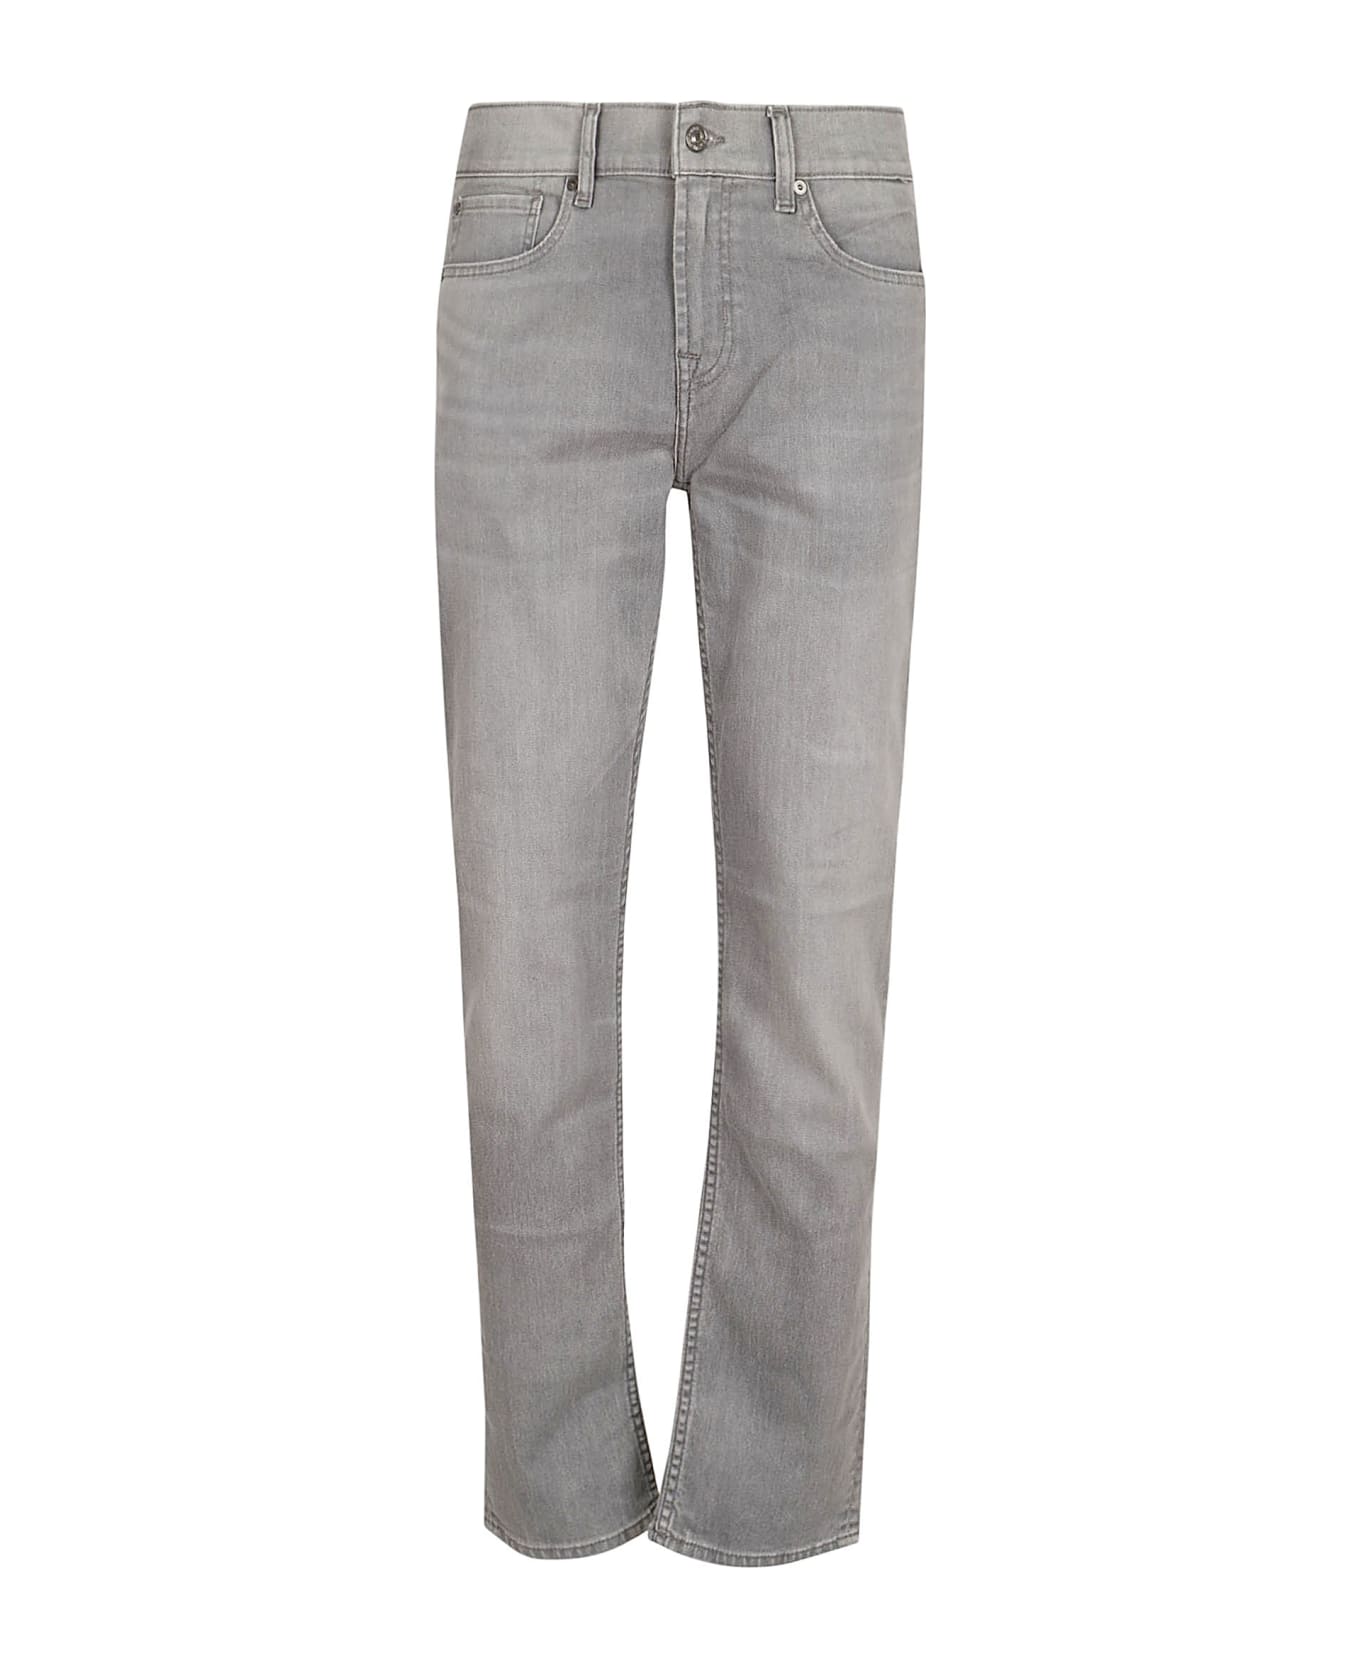 7 For All Mankind Slimmy Advance - Grey